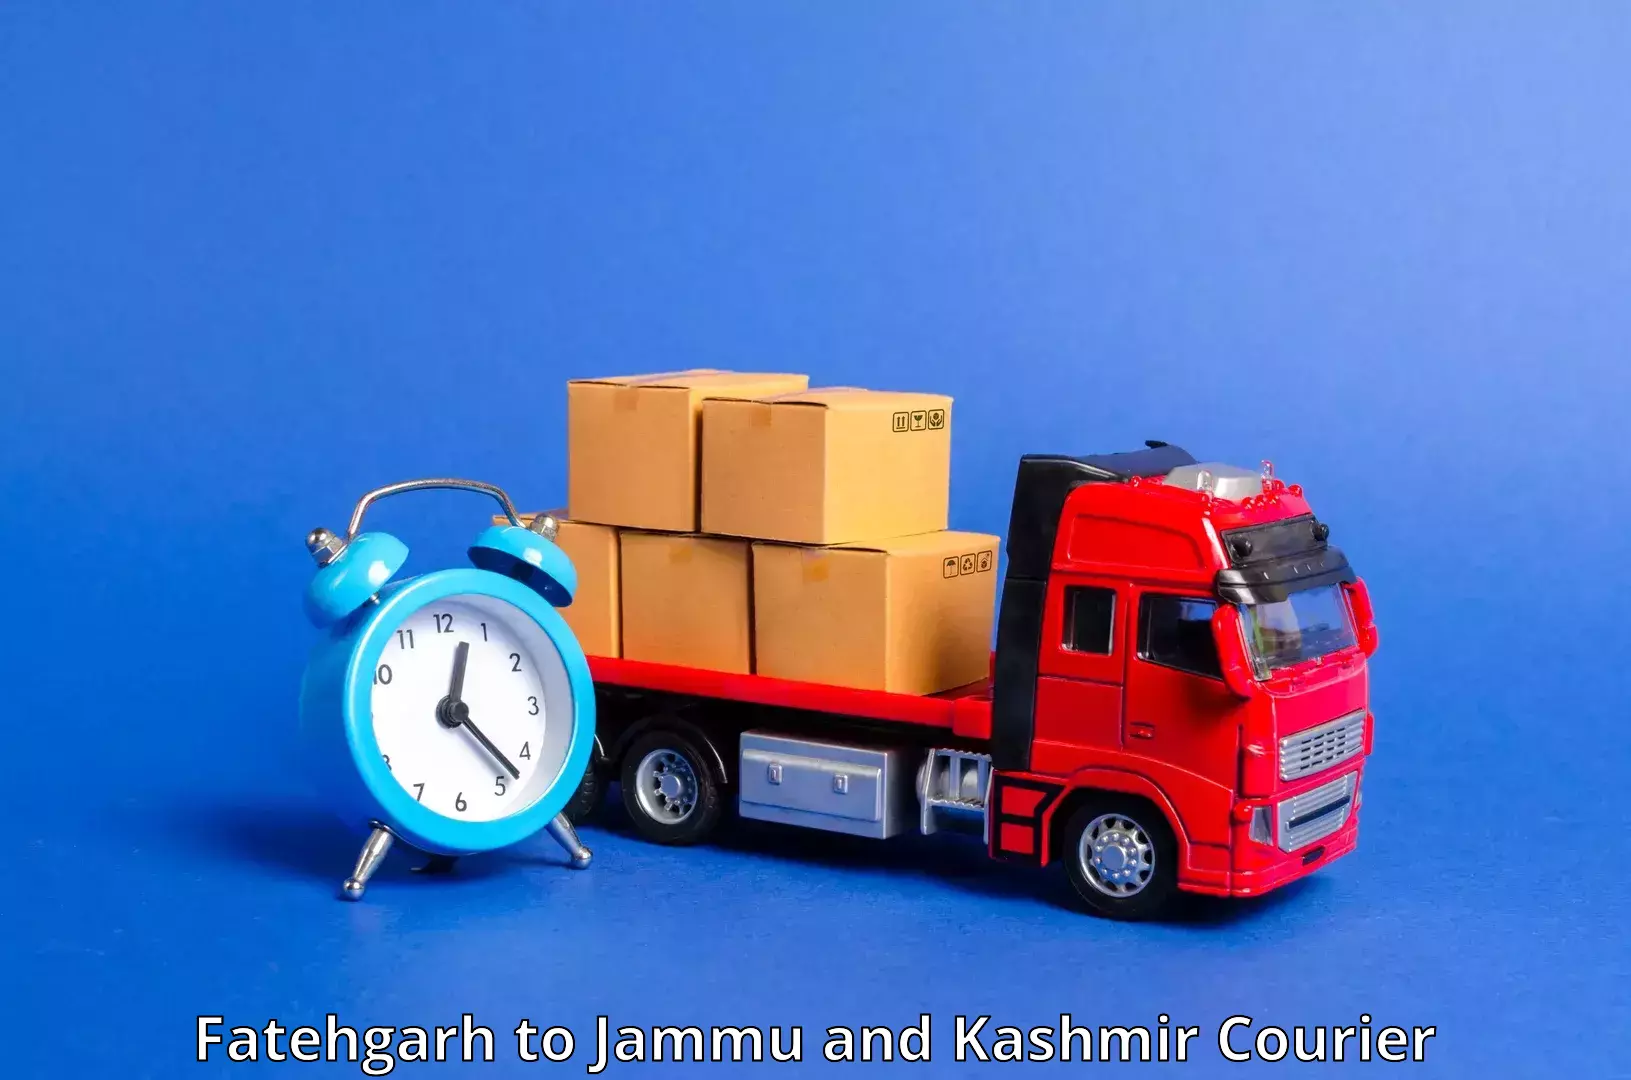 Express delivery capabilities Fatehgarh to Jammu and Kashmir